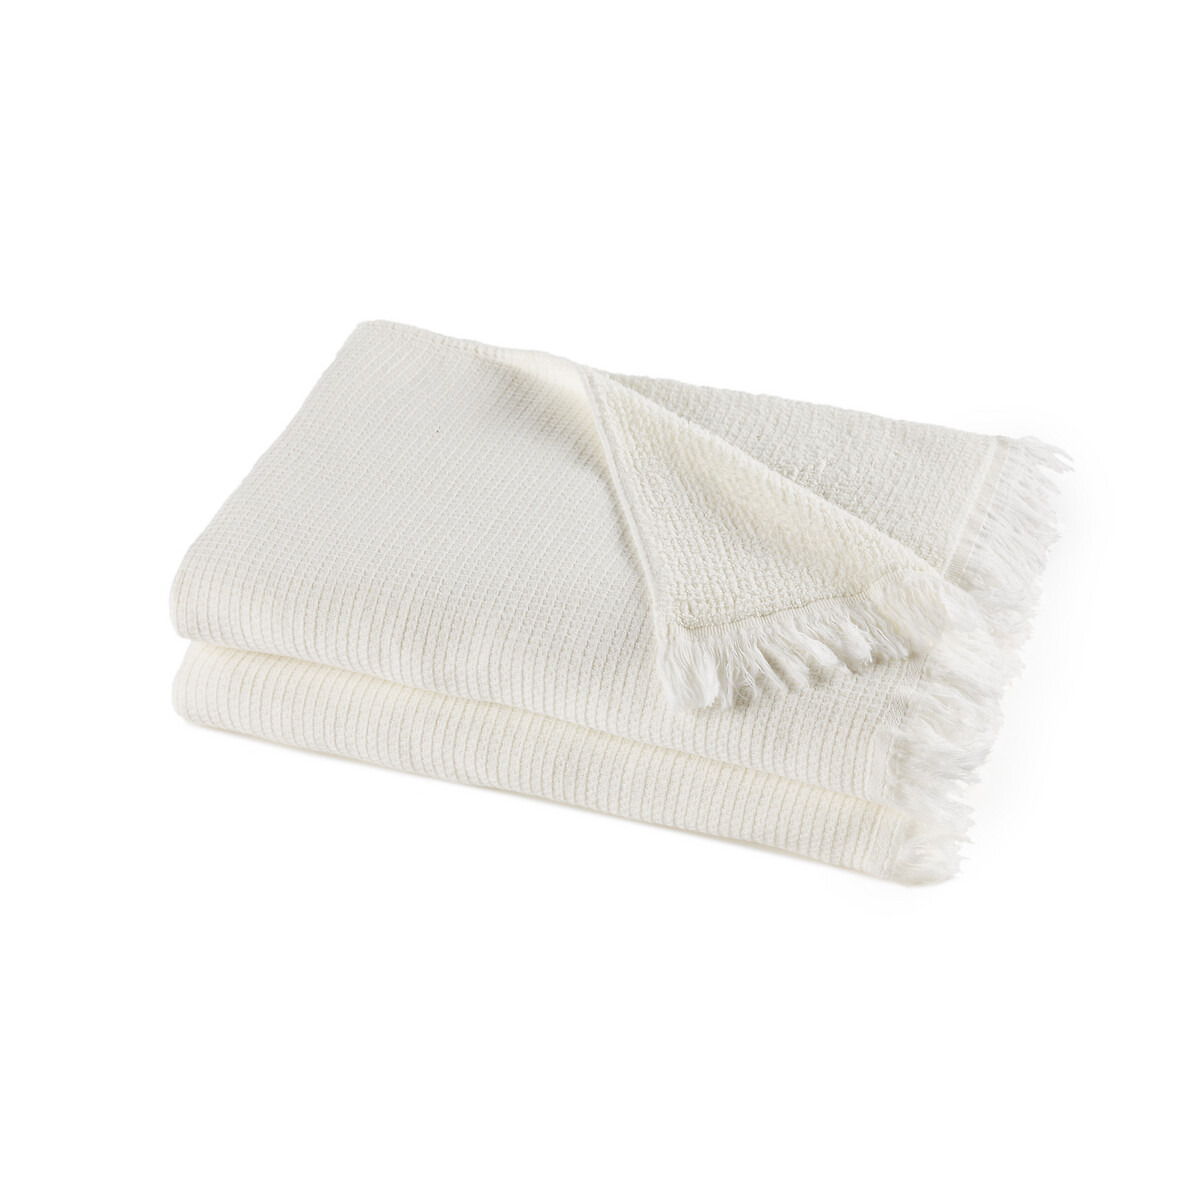 Set of 2 Nipaly Organic Cotton / Linen Towels